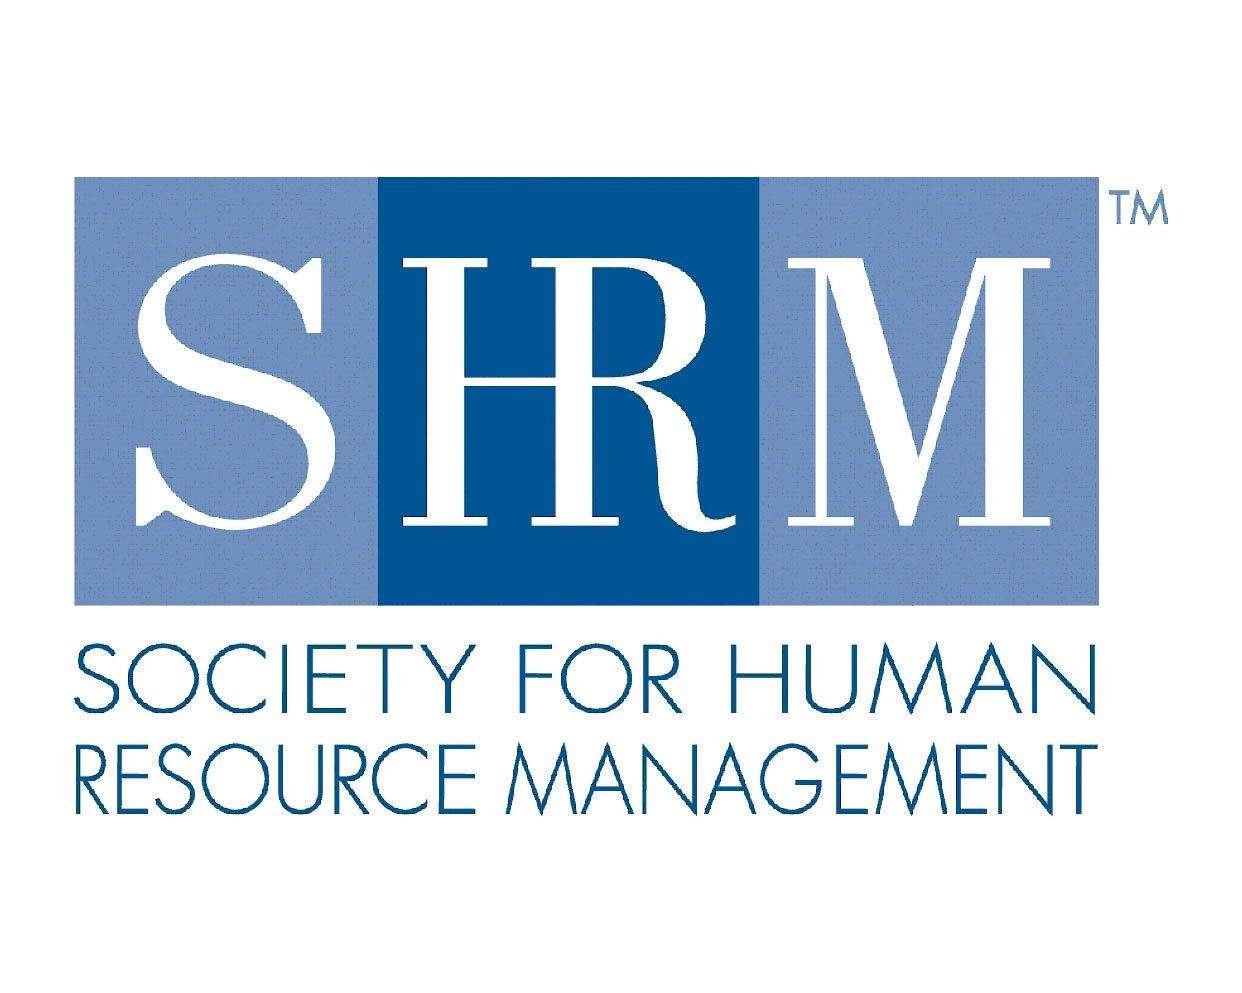 Society of Human Resource Management (SHRM)